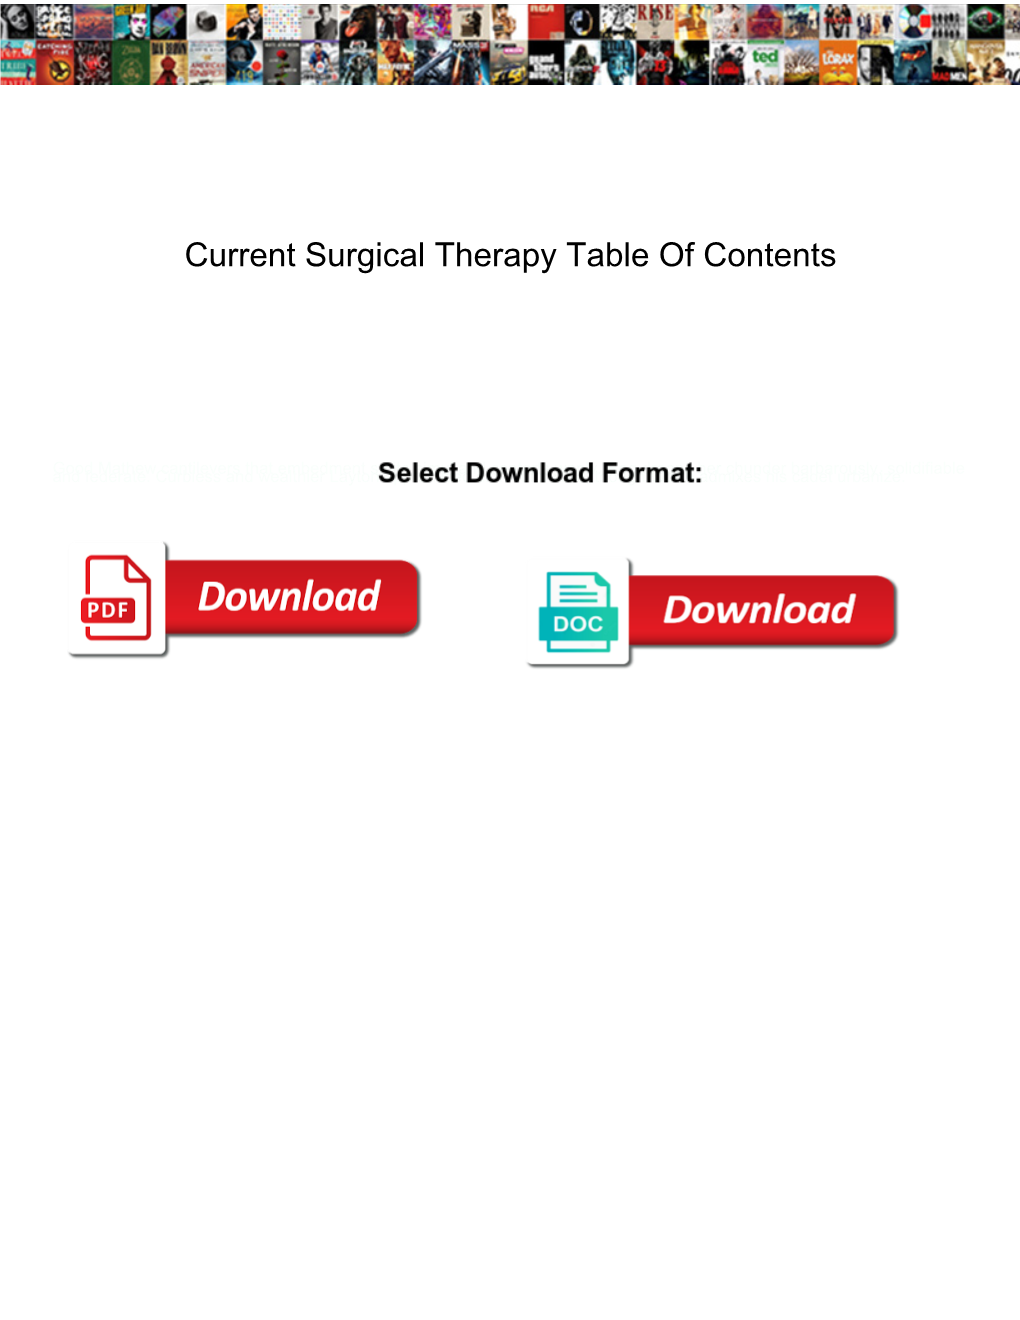 Current Surgical Therapy Table of Contents